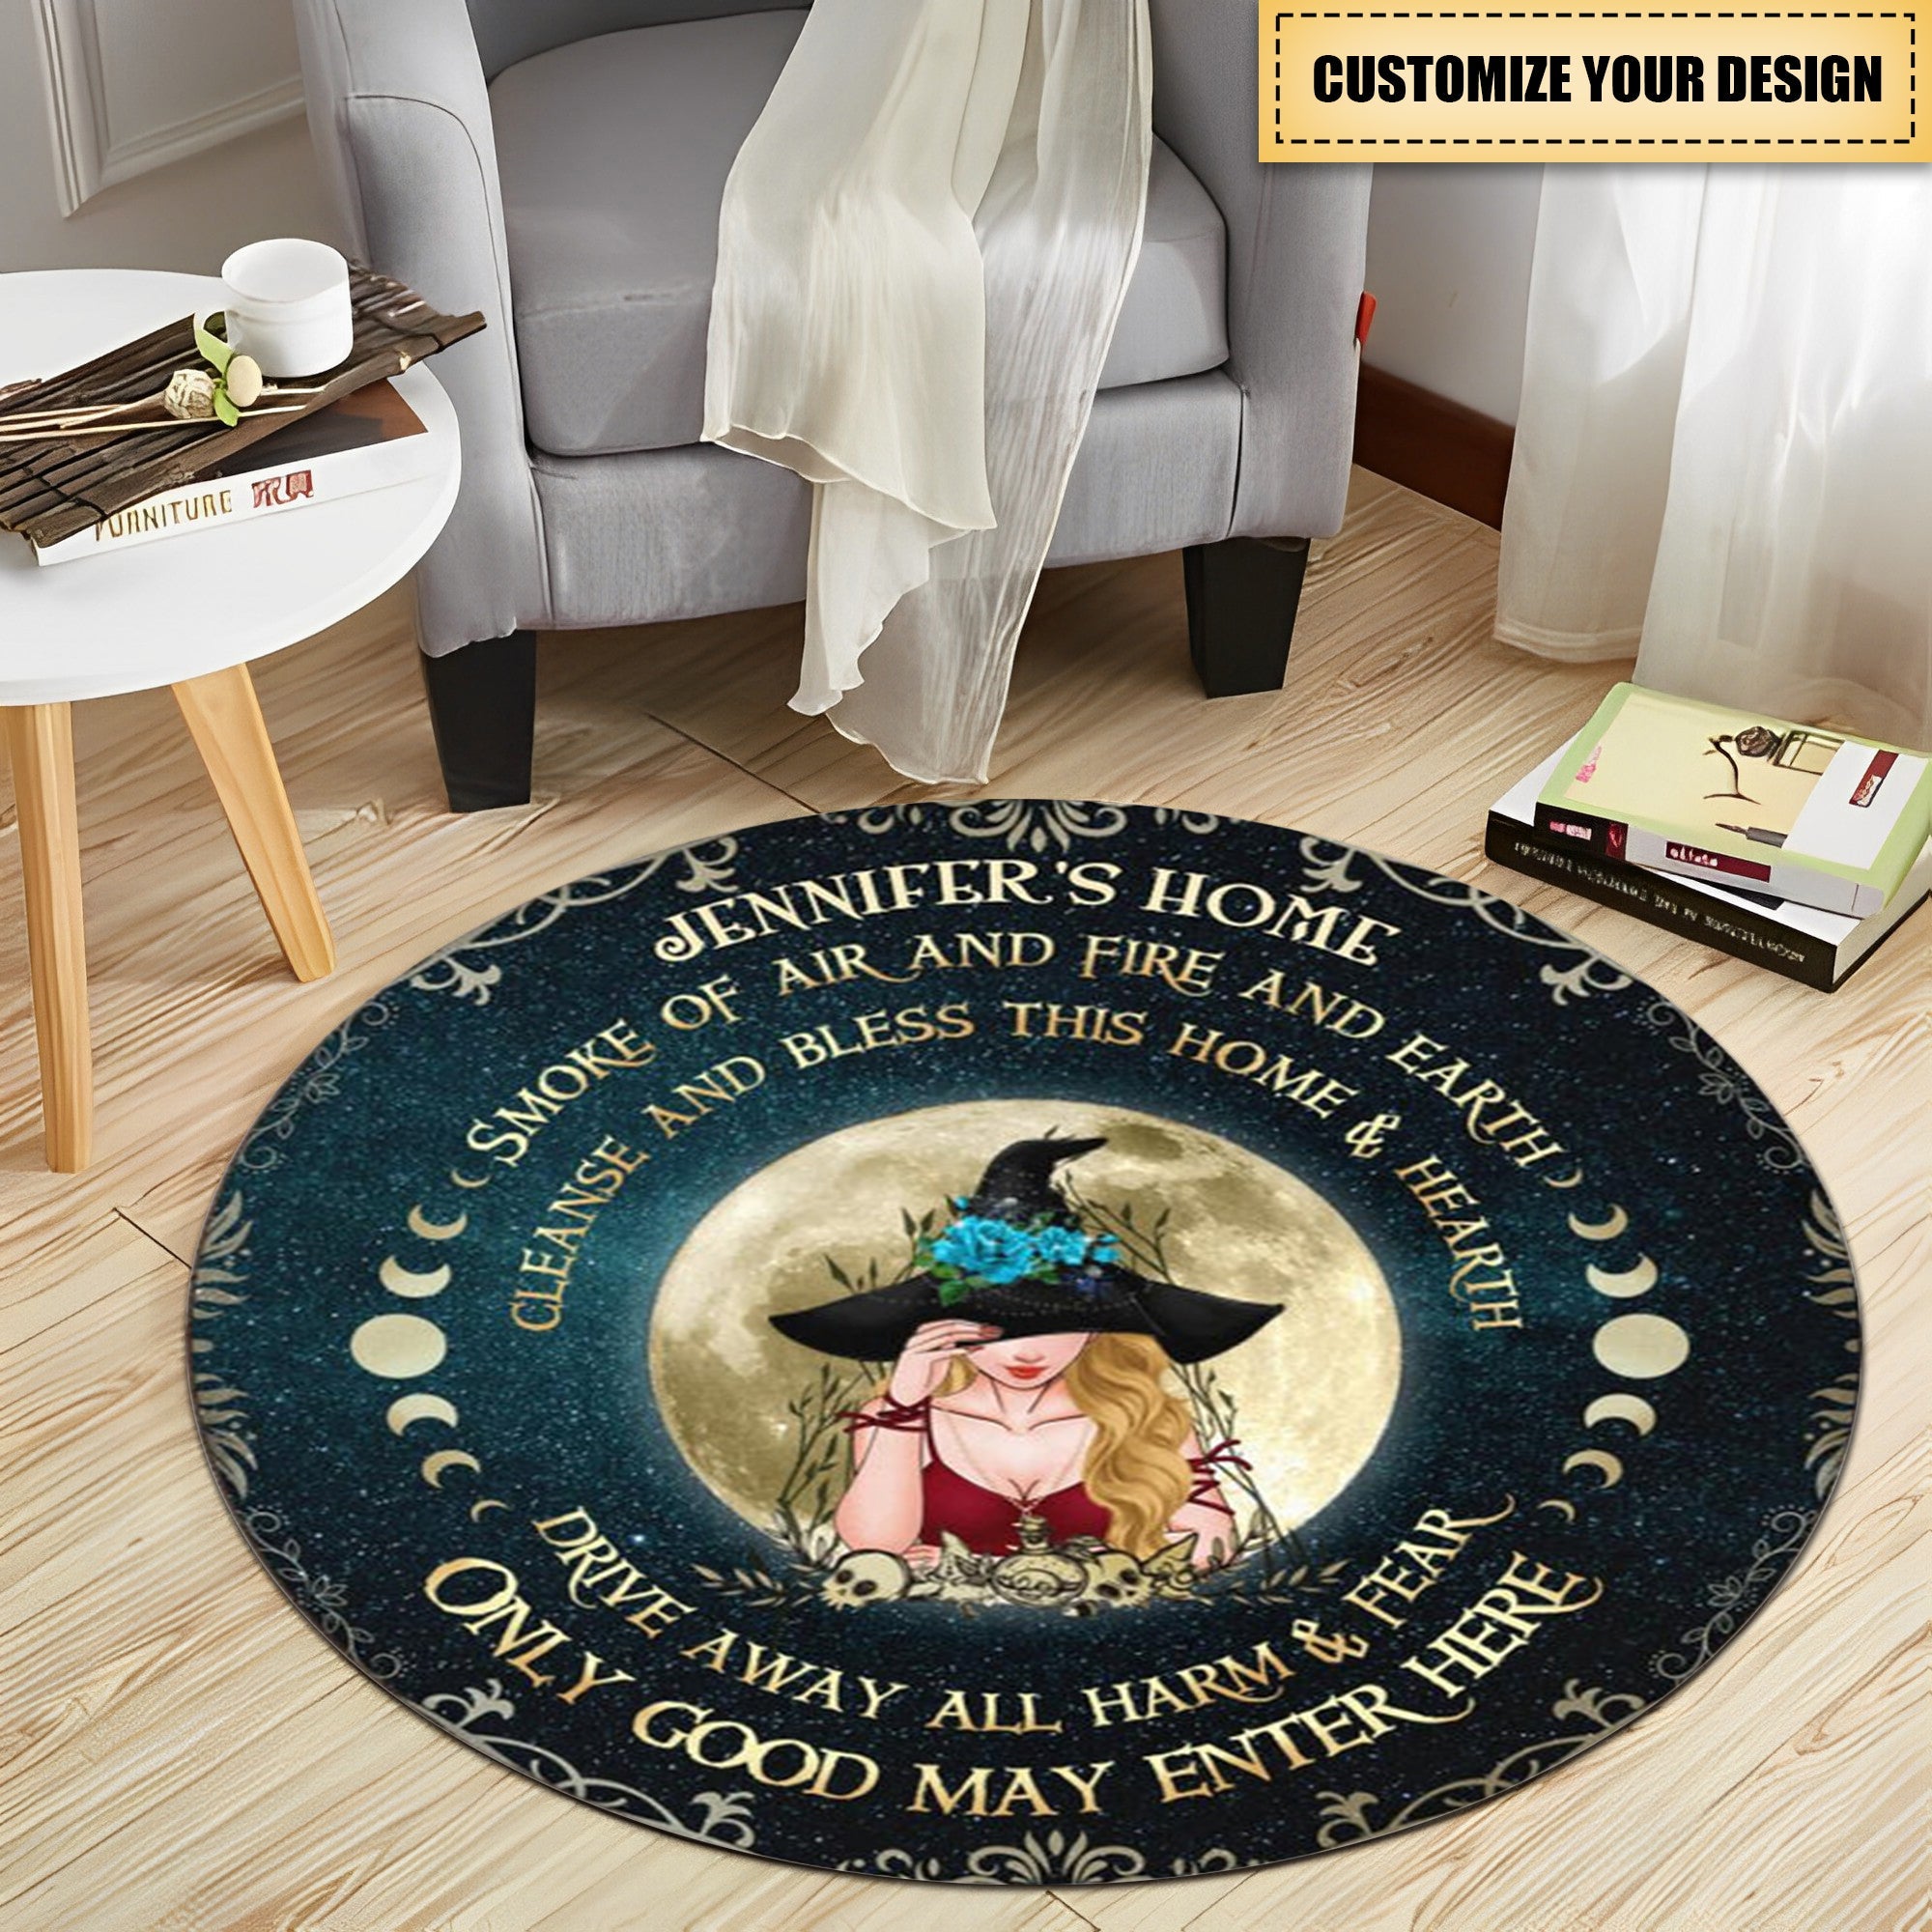 Custom Personalized Witch Round Rug - Gift Idea For Halloween/ Wicca Decor/Pagan Decor - Only Good May Enter Here